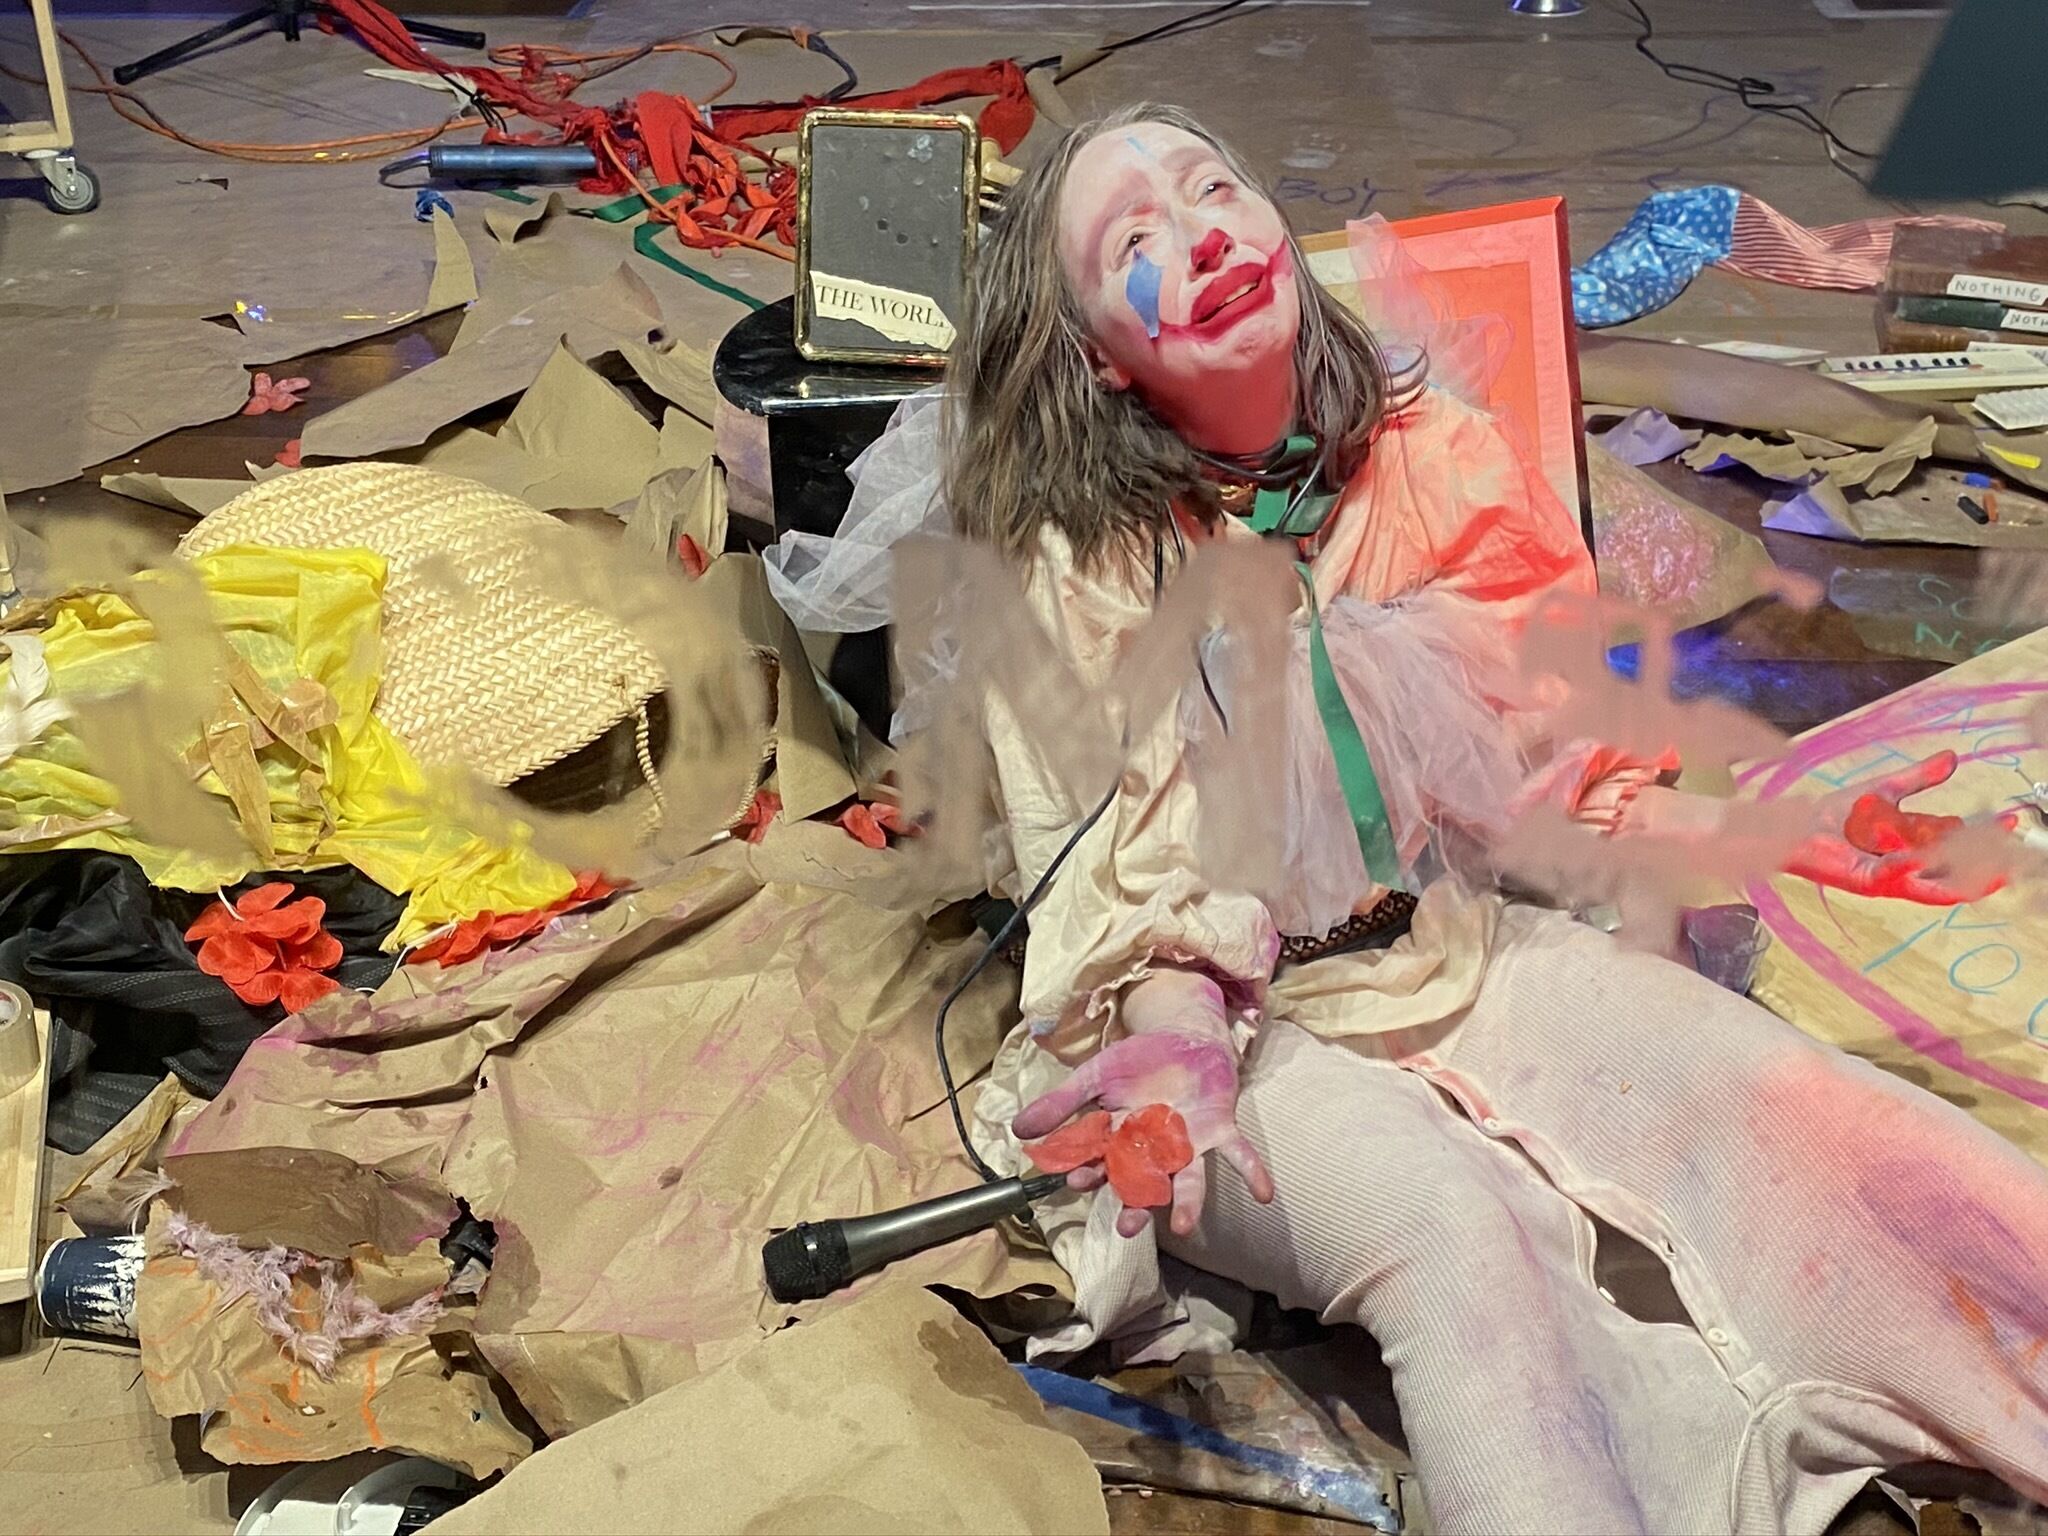 Person with clown makeup amidst chaotic scene with scattered props and colorful debris.